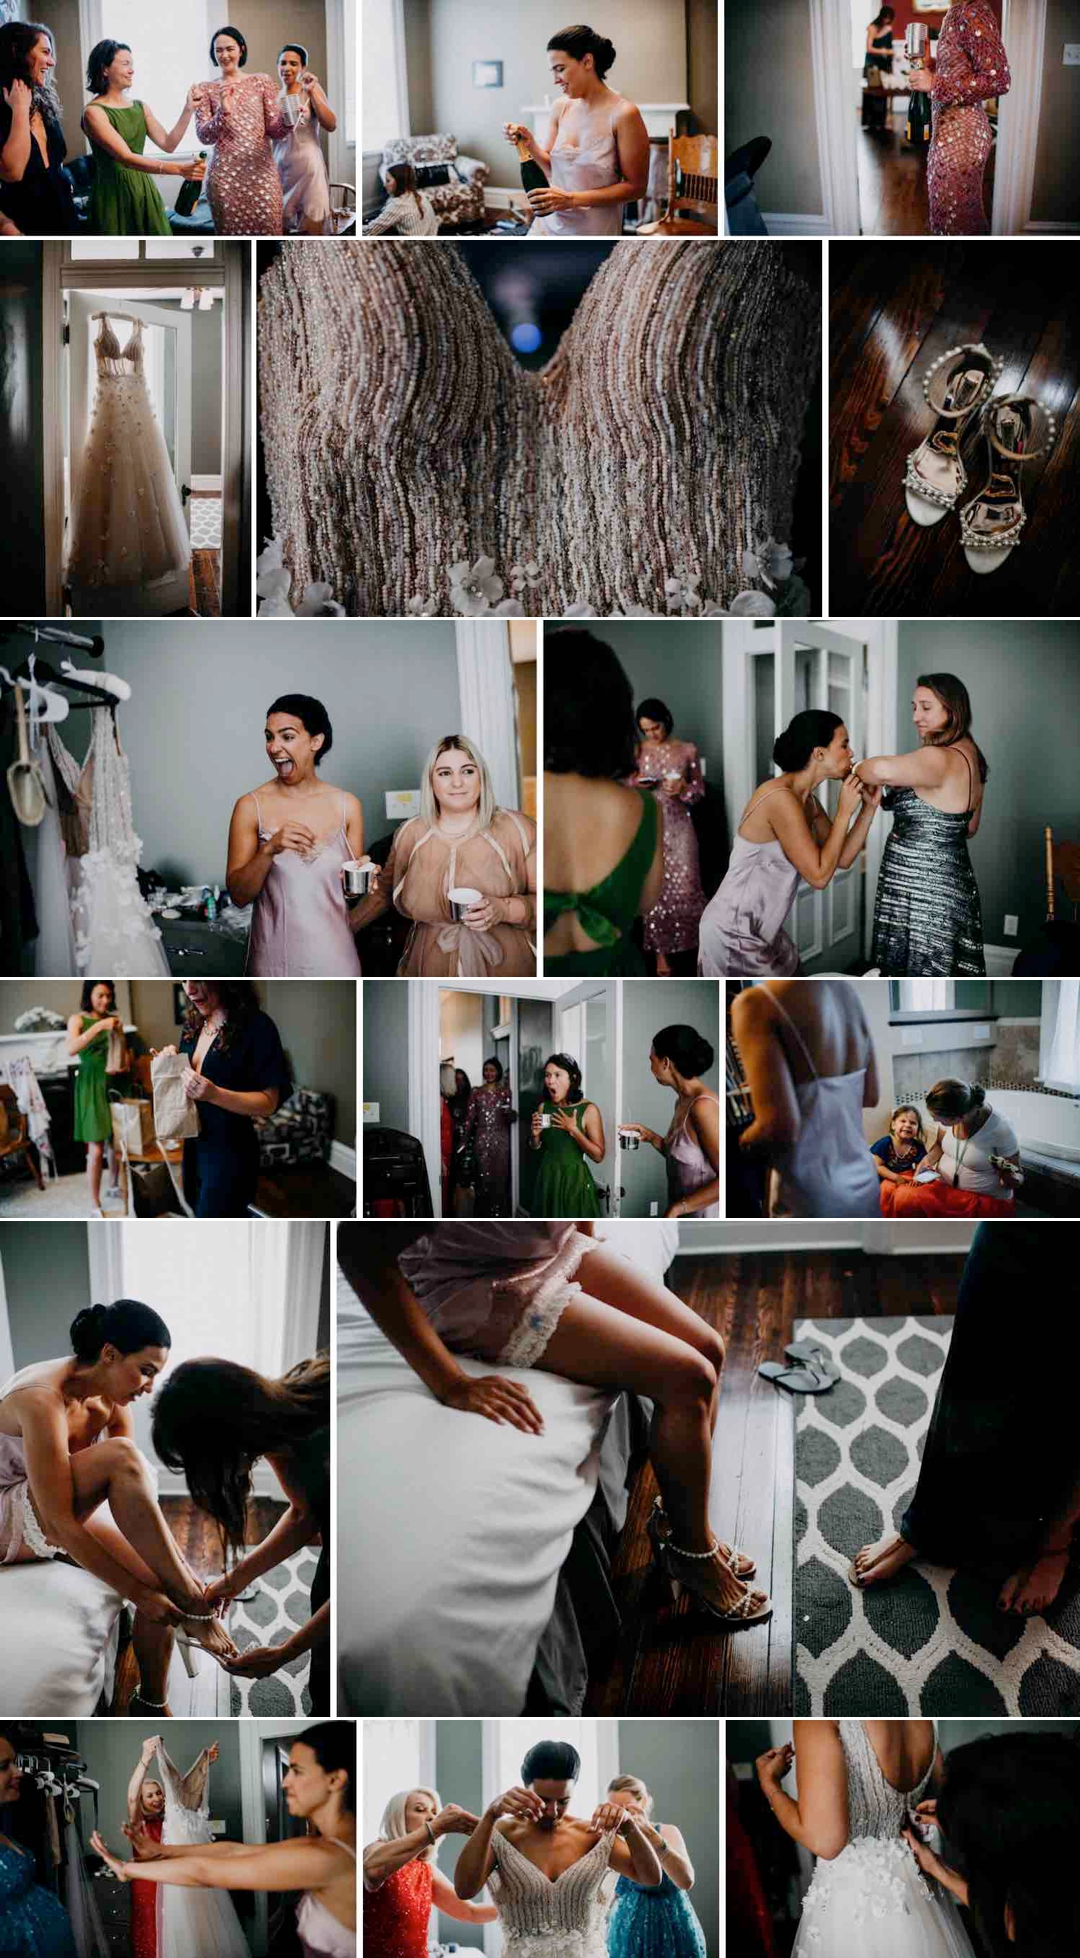 A collage of candid images of a bride getting ready with her family at her home on her wedding day.